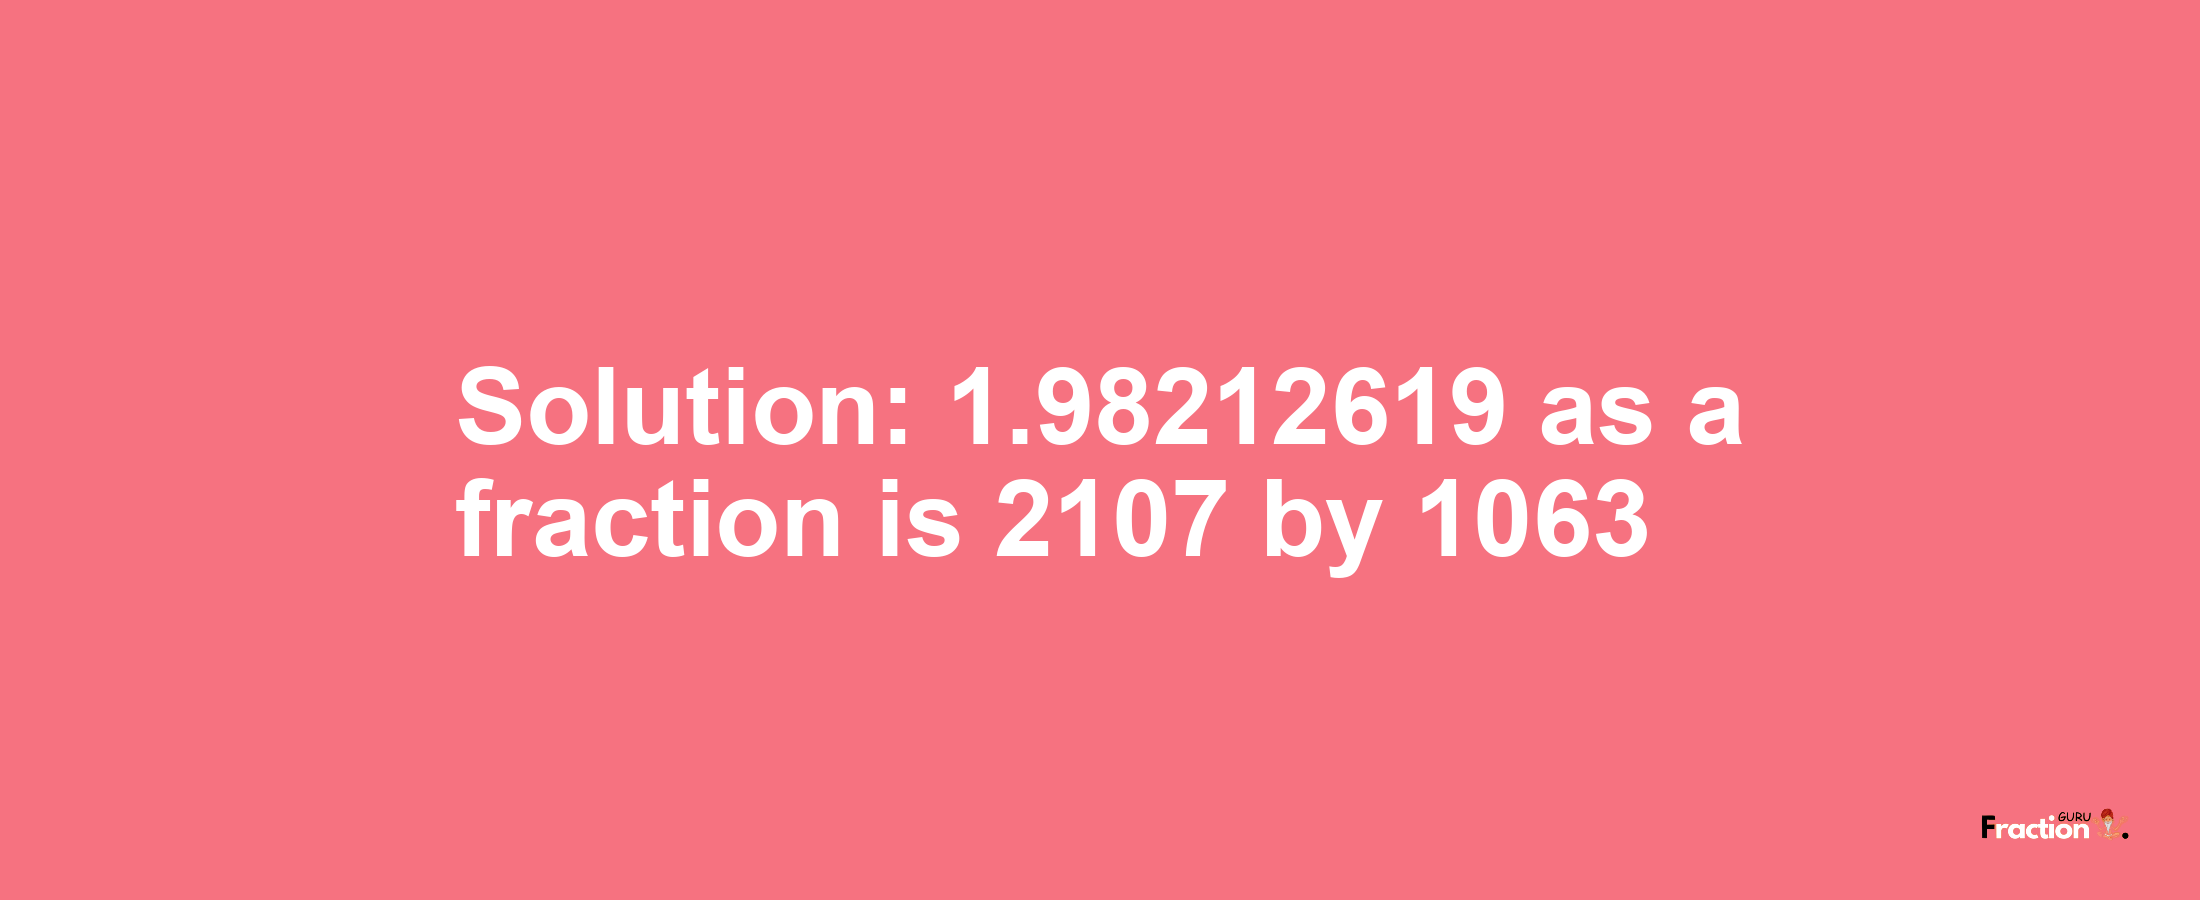 Solution:1.98212619 as a fraction is 2107/1063